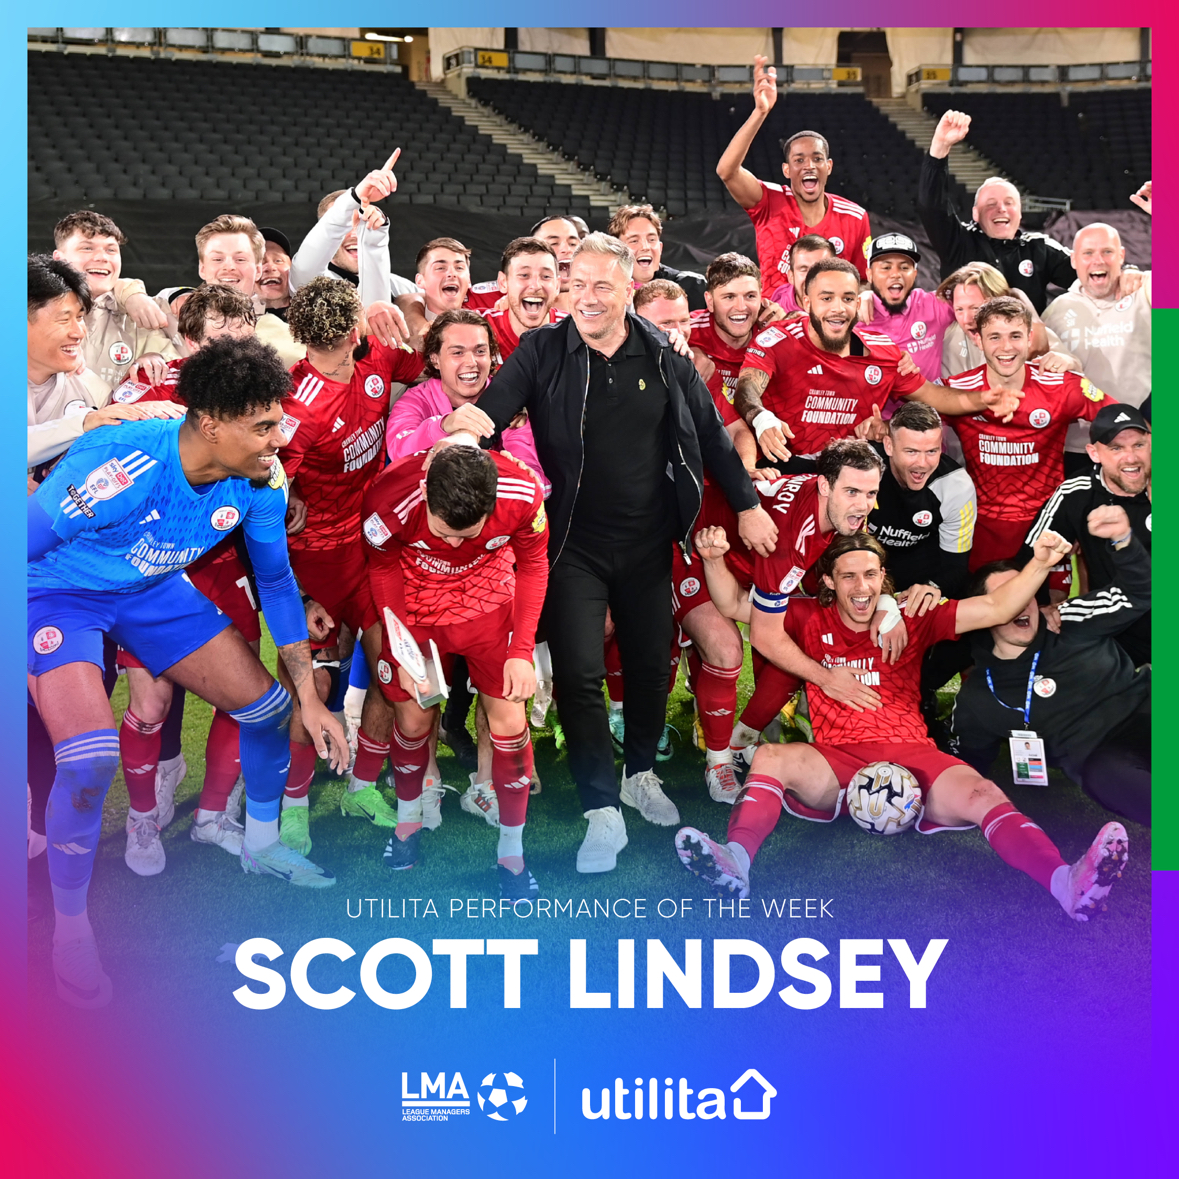 𝗨𝘁𝗶𝗹𝗶𝘁𝗮 𝗣𝗲𝗿𝗳𝗼𝗿𝗺𝗮𝗻𝗰𝗲 𝗼𝗳 𝘁𝗵𝗲 𝗪𝗲𝗲𝗸 🏆 Congratulations to @crawleytown boss Scott Lindsey on winning the ‘Utilita Performance of the Week’ award. His side won 5-1 at MK Dons to take themselves to Wembley! Voted by @LMA_Managers #TownTeamTogether 🔴